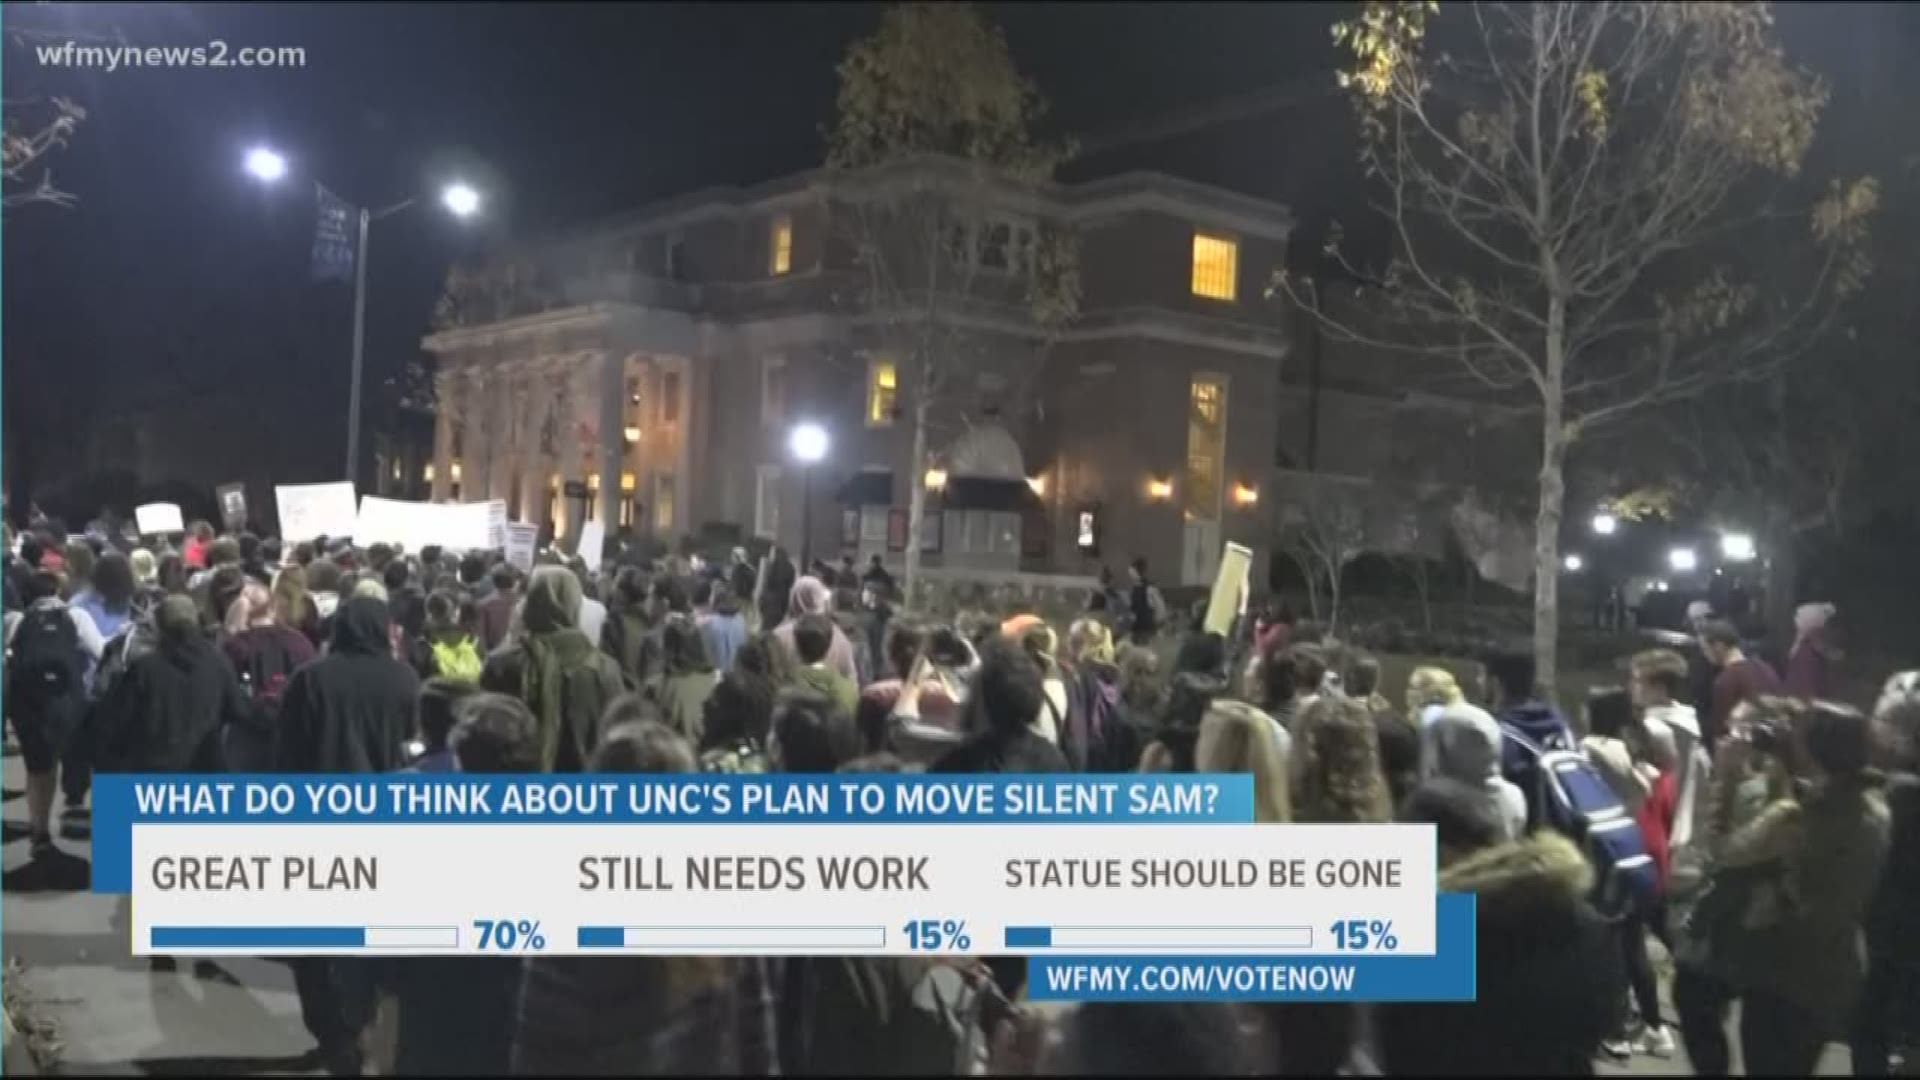 Protesters disagree with the UNC's plan to develop and house the confederate statue on South Campus.